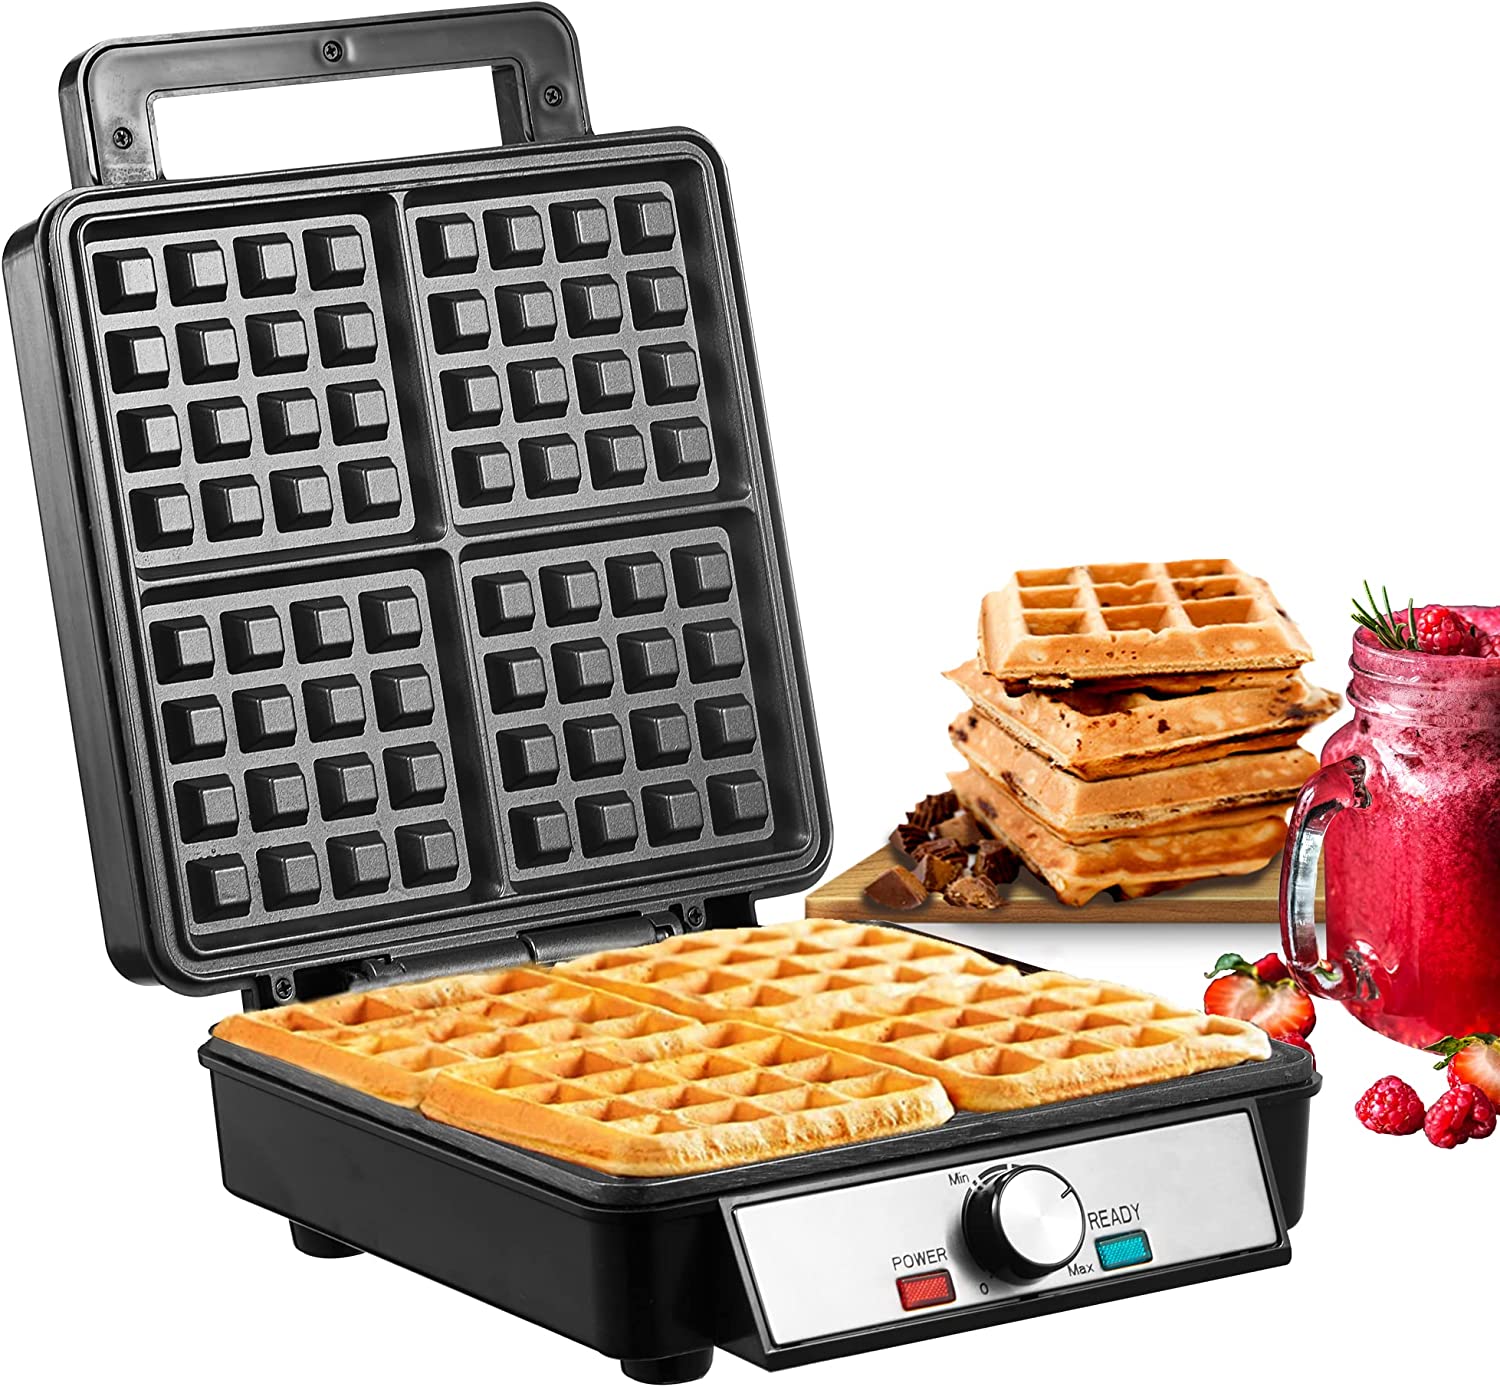 FOHERE Waffle iron, 4 Belgian waffles at the same time, 1200 watts, adjustable temperature control, non-stick coated plates and easy to clean, stainless steel